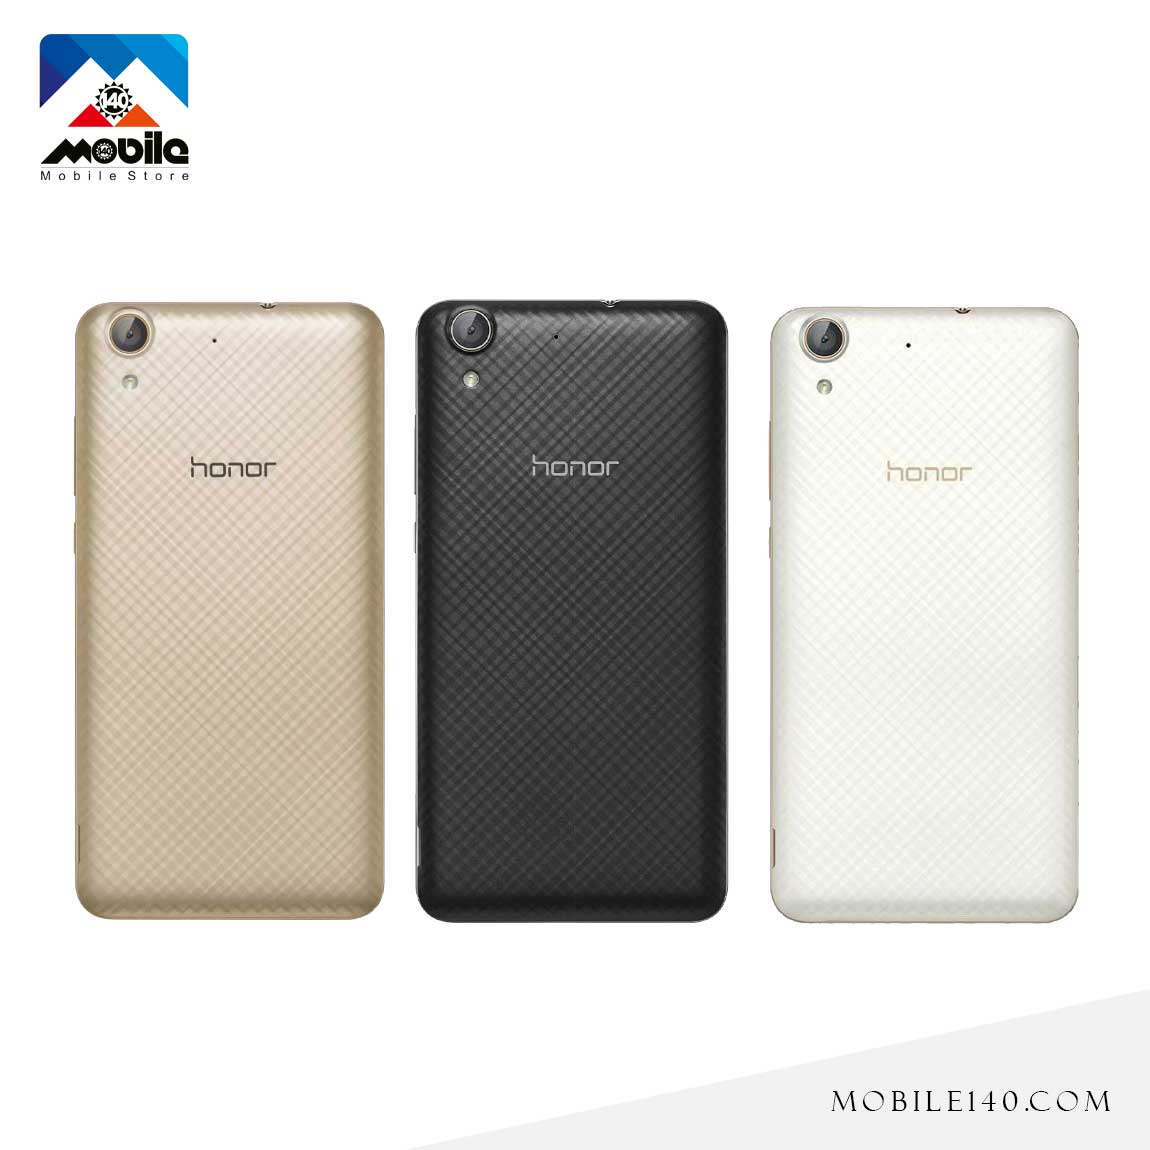  Honor 5A  5